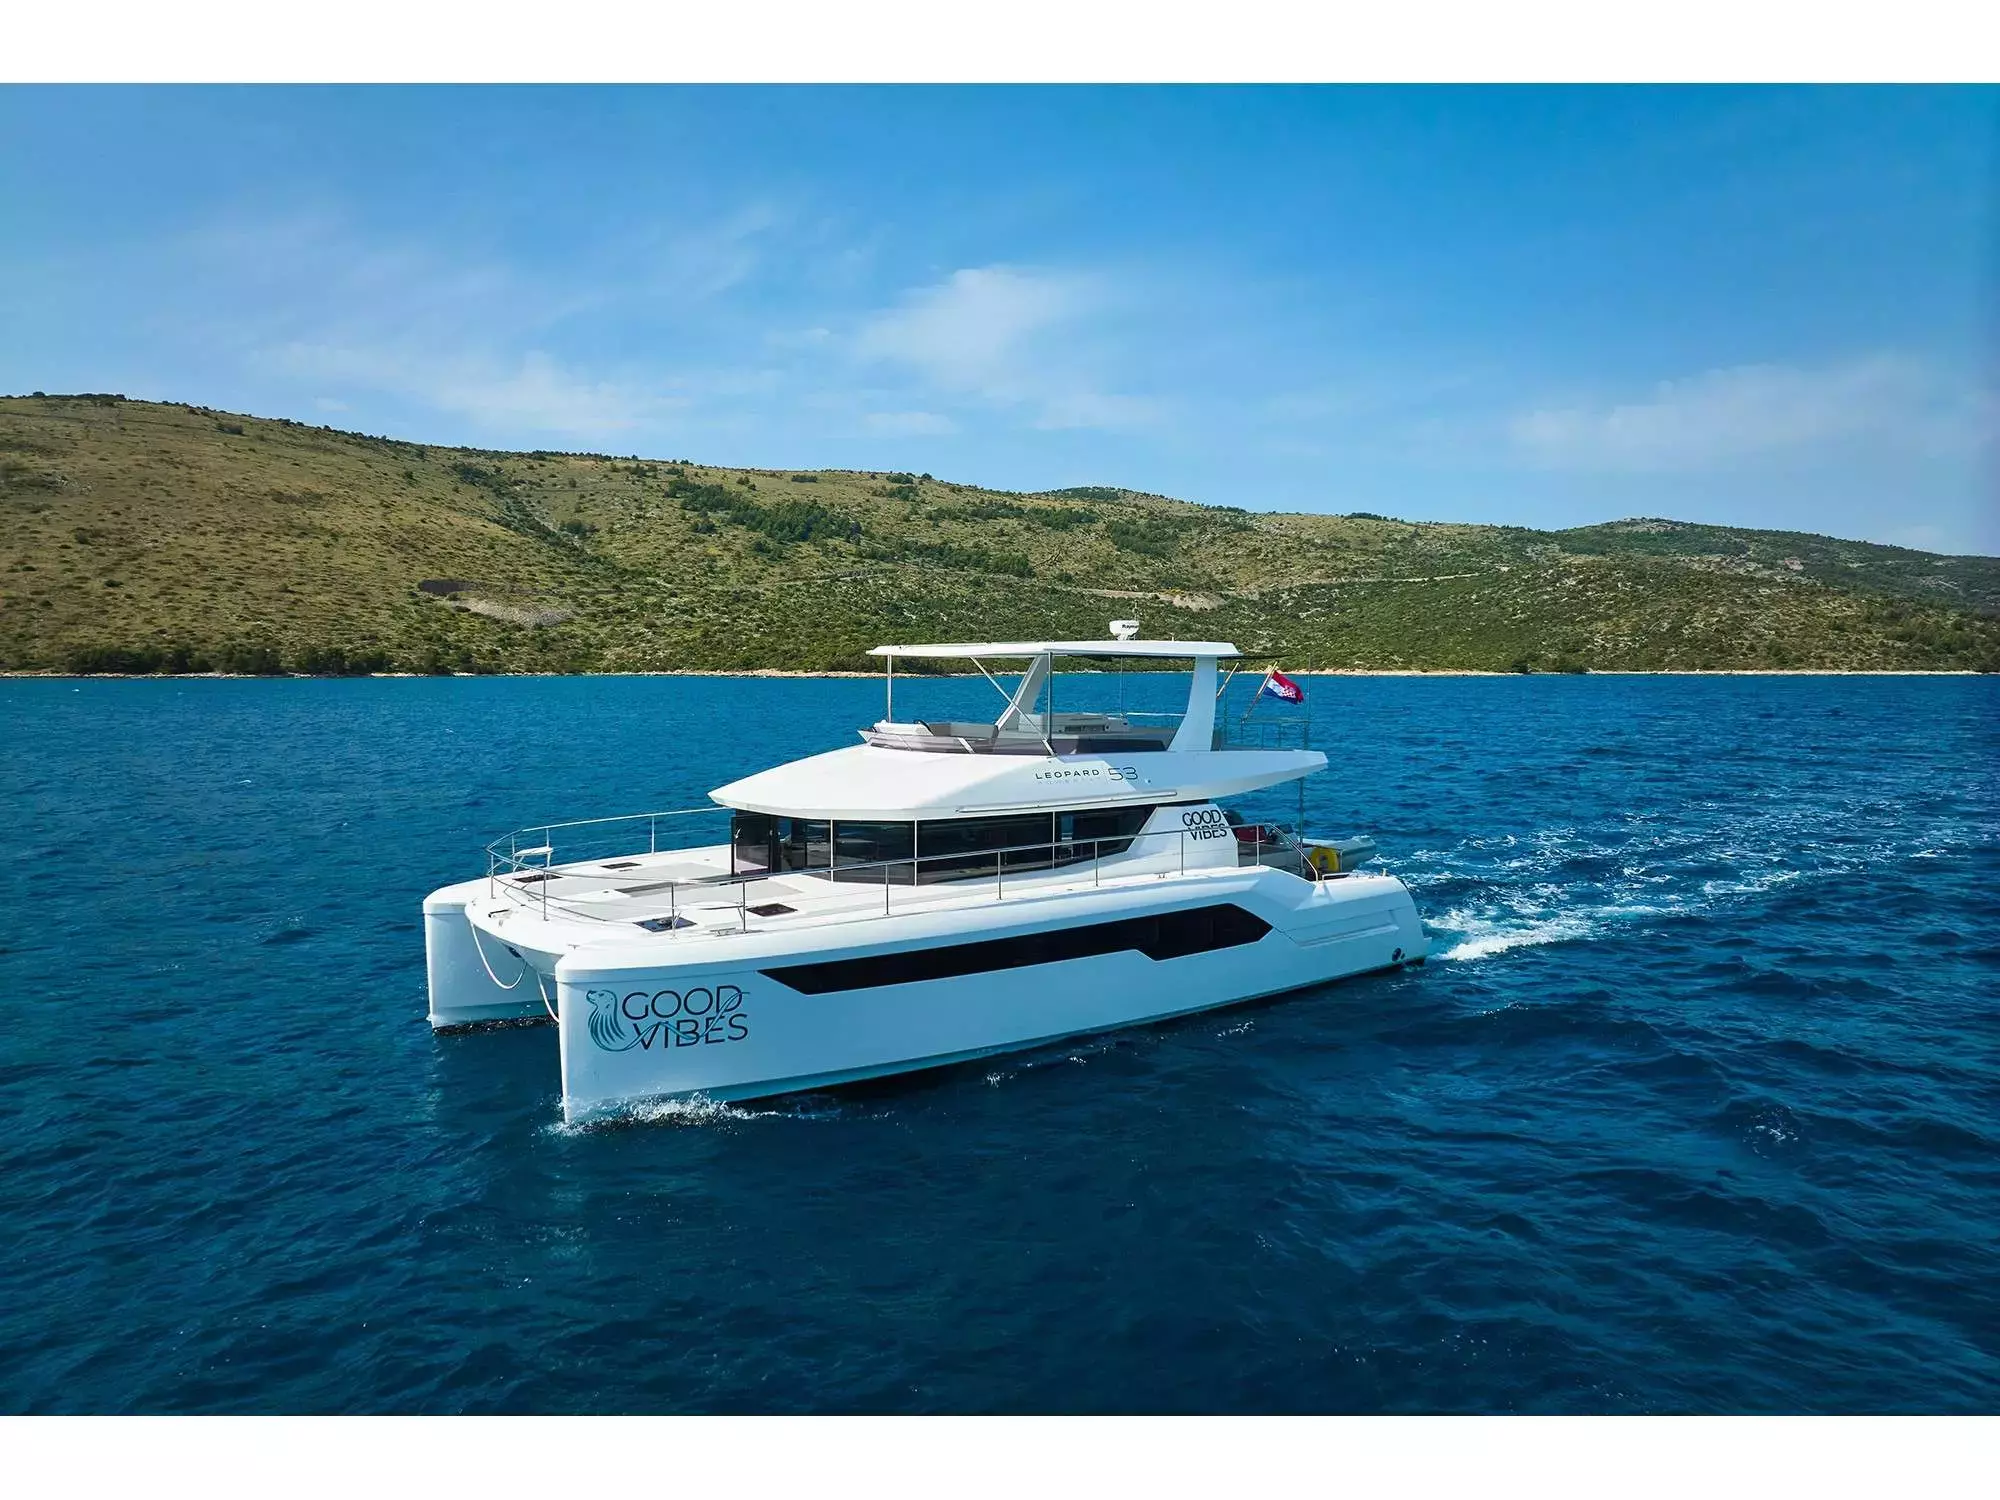 Good Vibes by Leopard Catamarans - Top rates for a Charter of a private Power Catamaran in Croatia